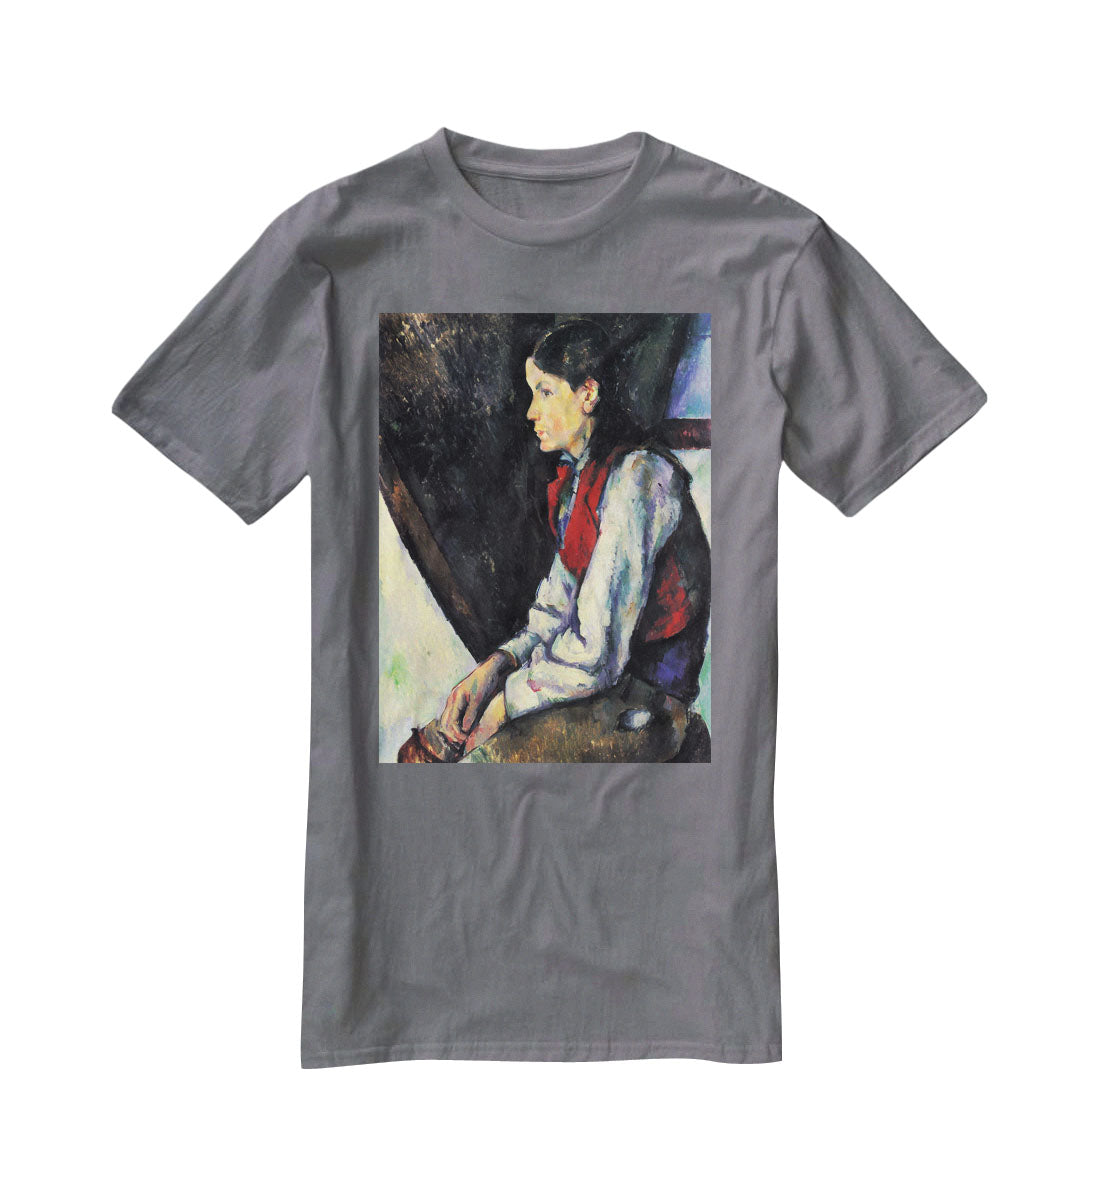 Boy with Red Vest by Cezanne T-Shirt - Canvas Art Rocks - 3